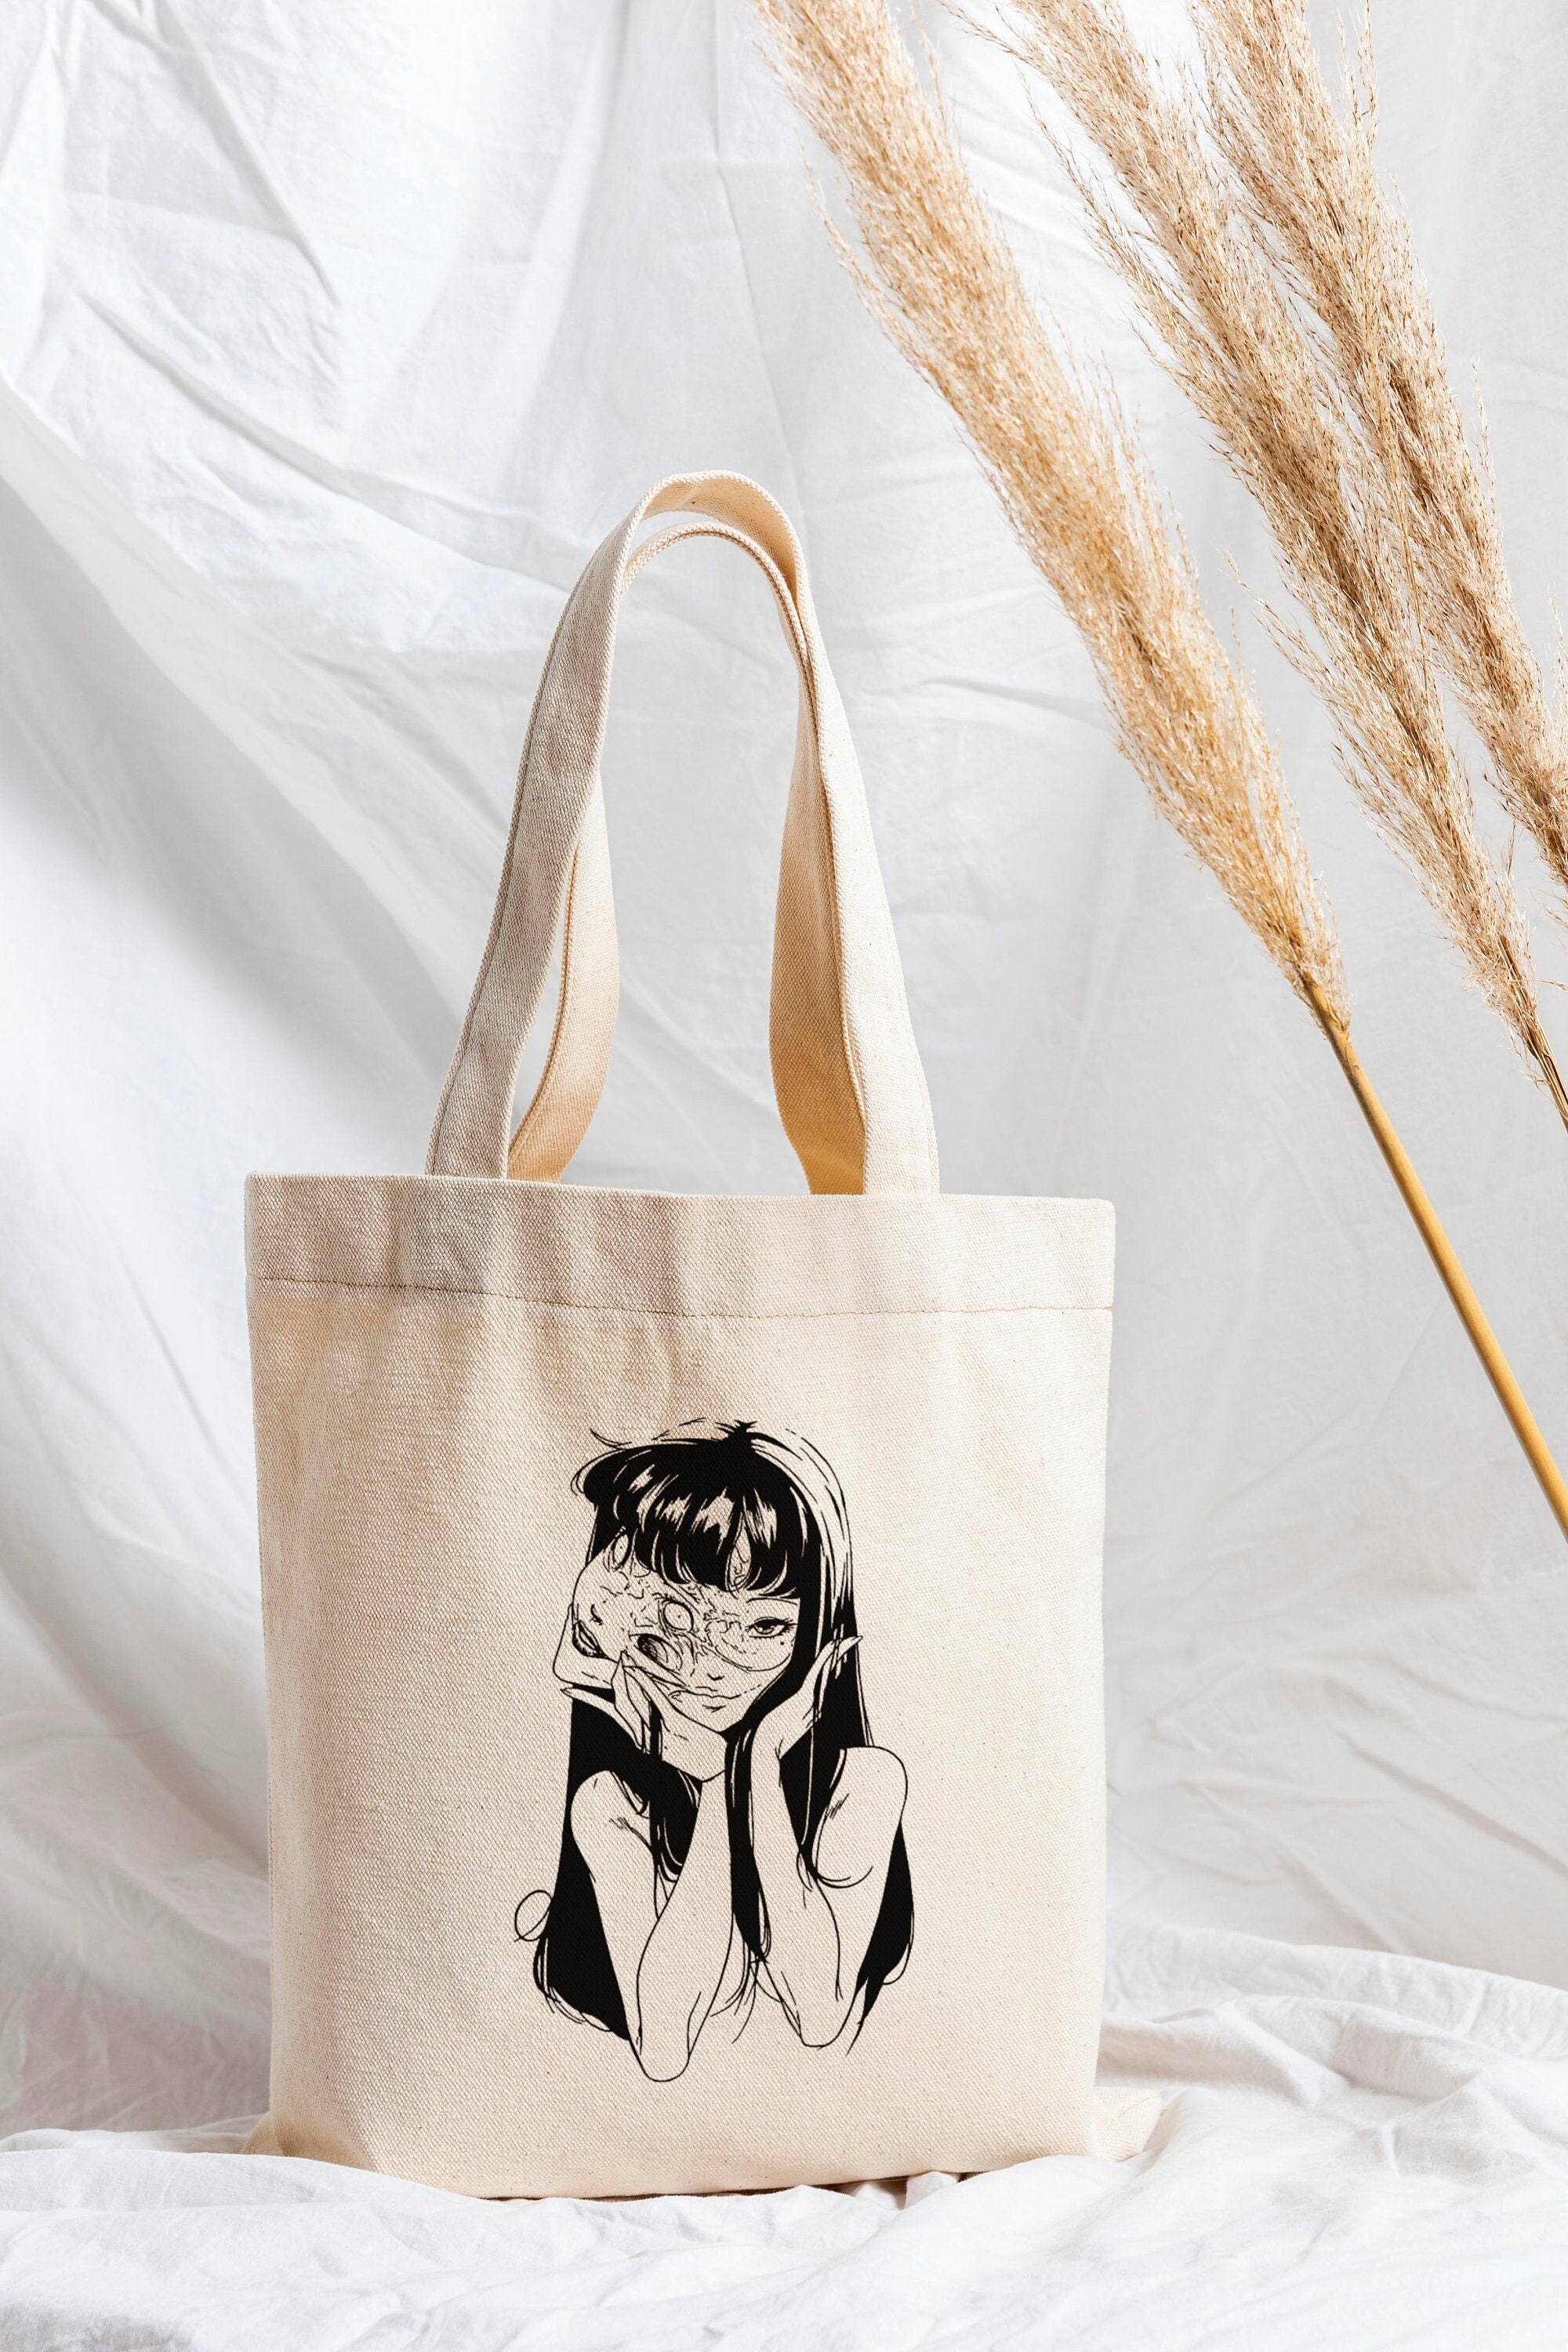 Samantha Vega teams up with Jujutsu Kaisen for cool line of character-themed  bags and accessories | SoraNews24 -Japan News-